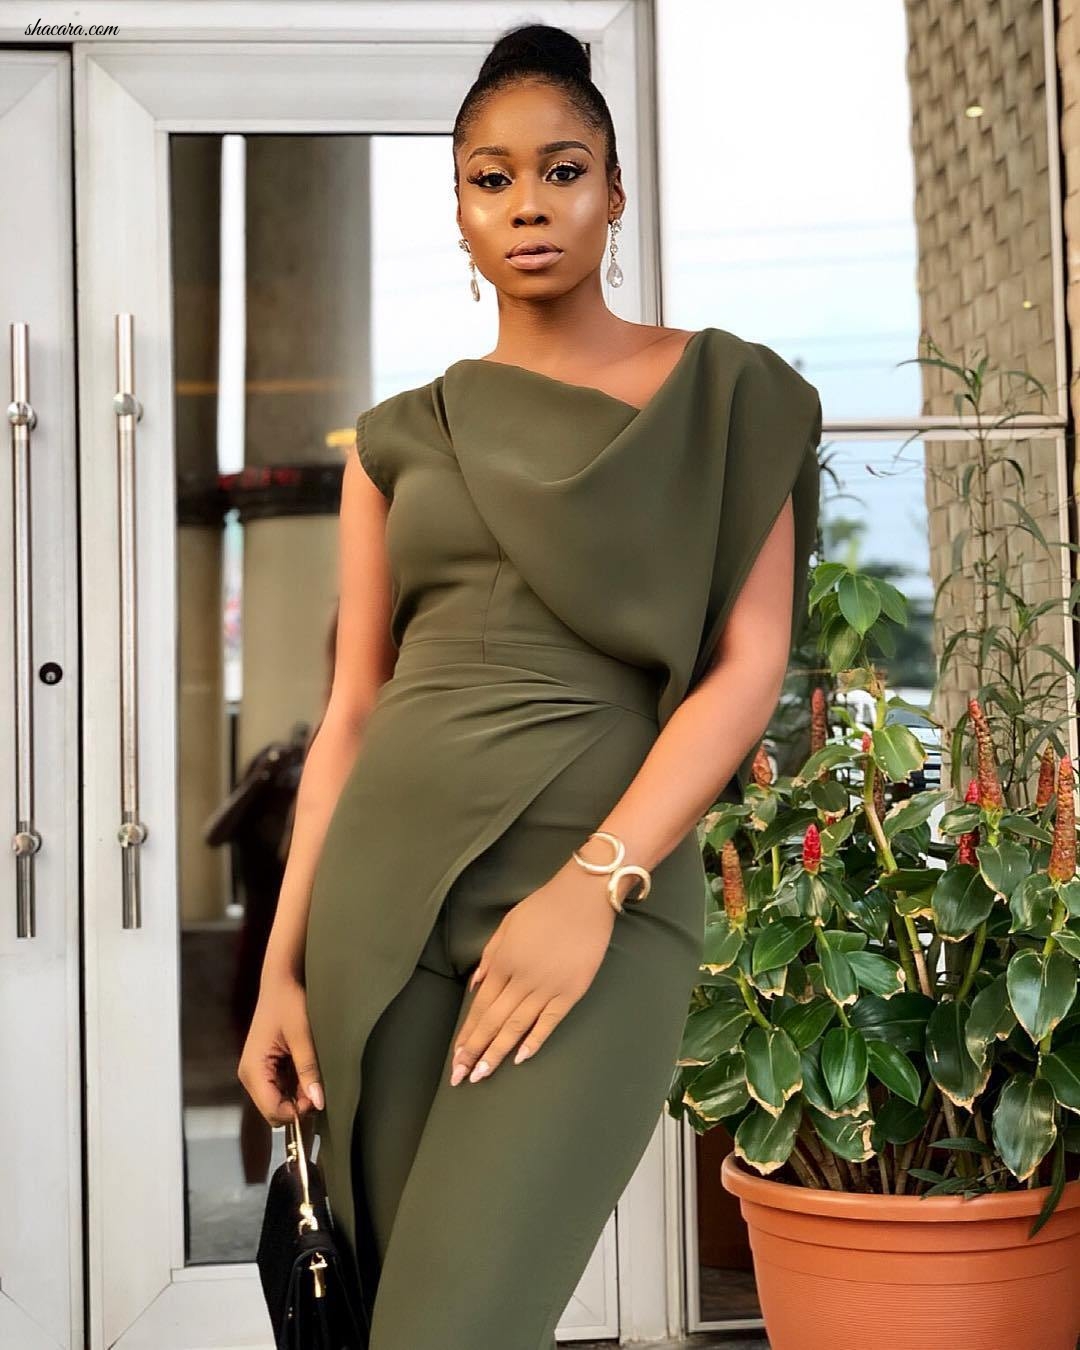 Lilian Afegbai Rocks A Ballerina Bun While Looking Impossibly Chic In Army Green